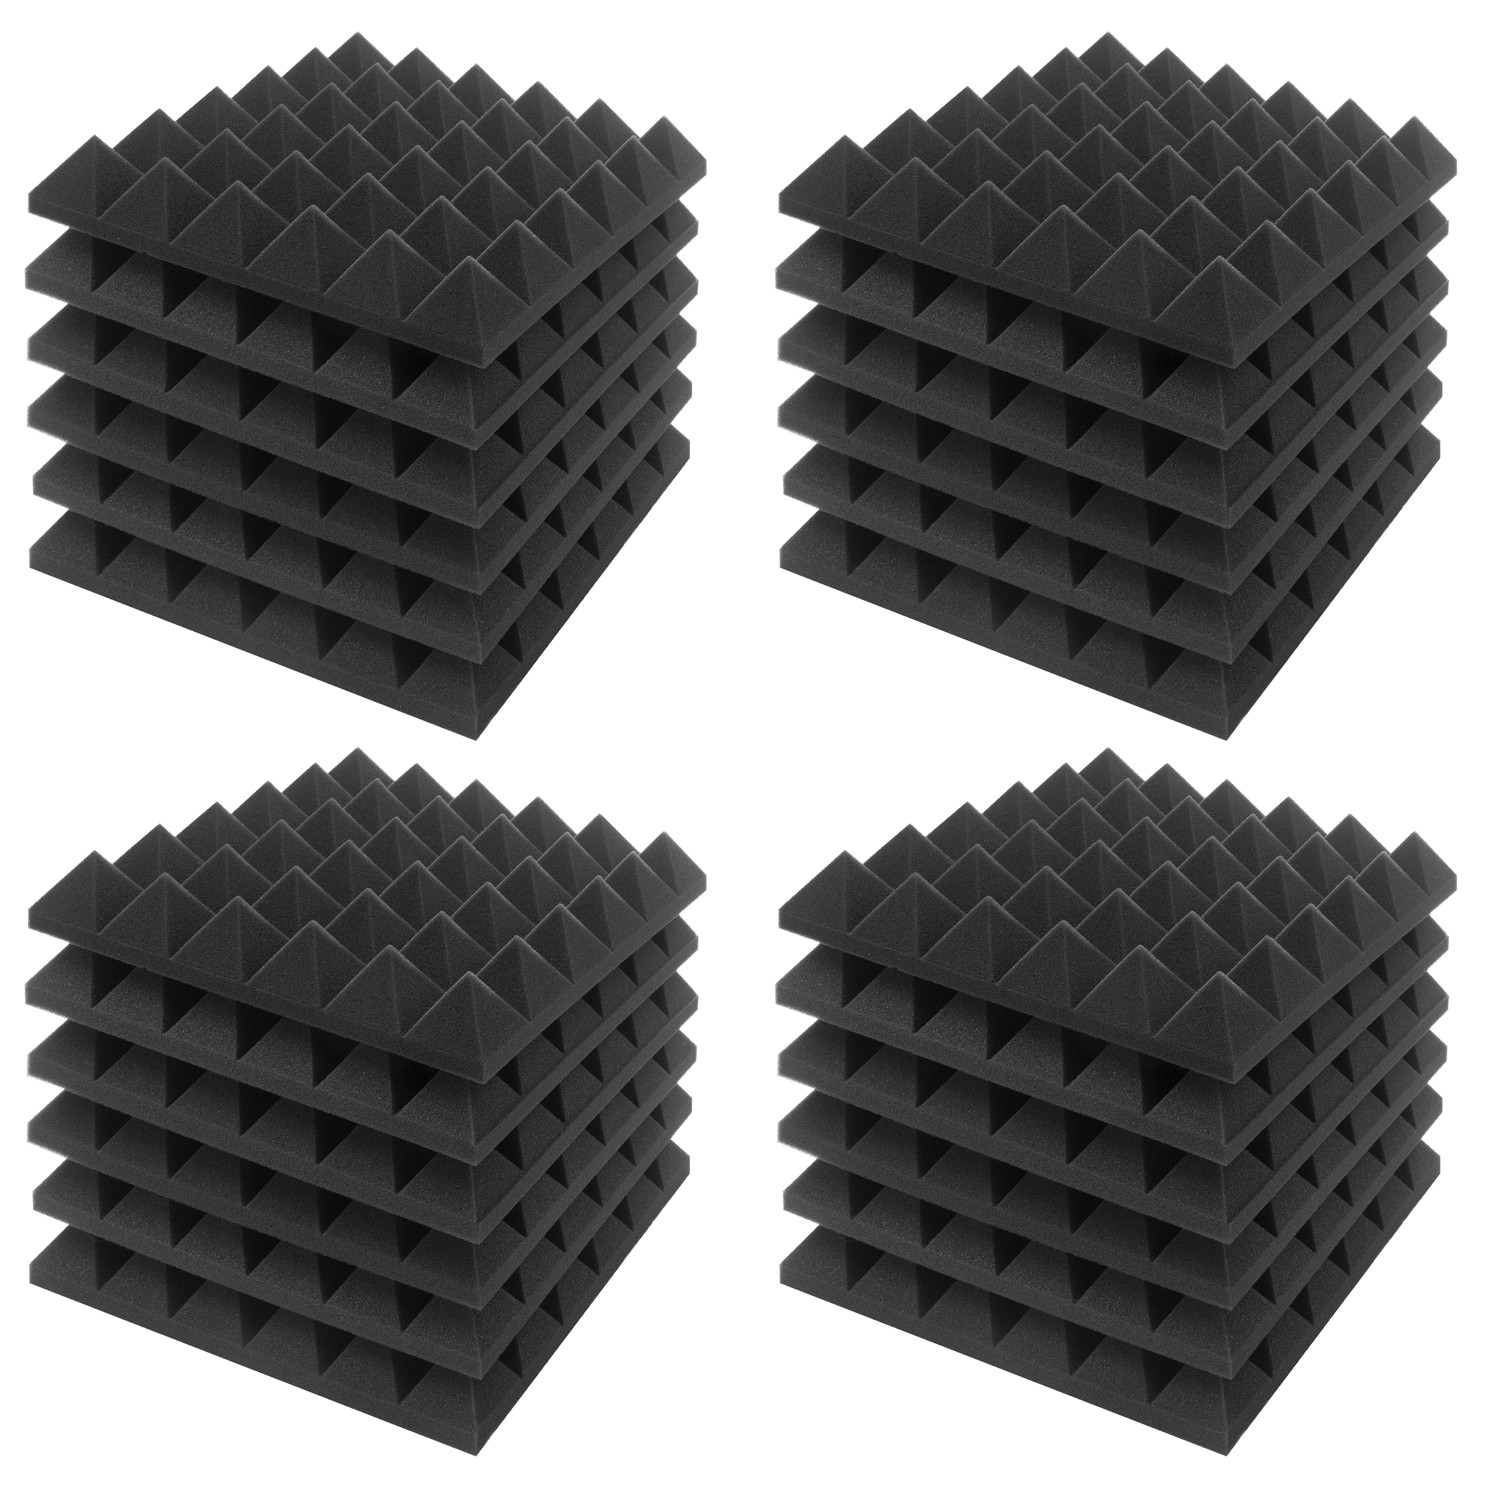 2" Wedge 12"x 12" Acoustic Soundproofing Studio Wall Booth Foam Panels 48 PACK 